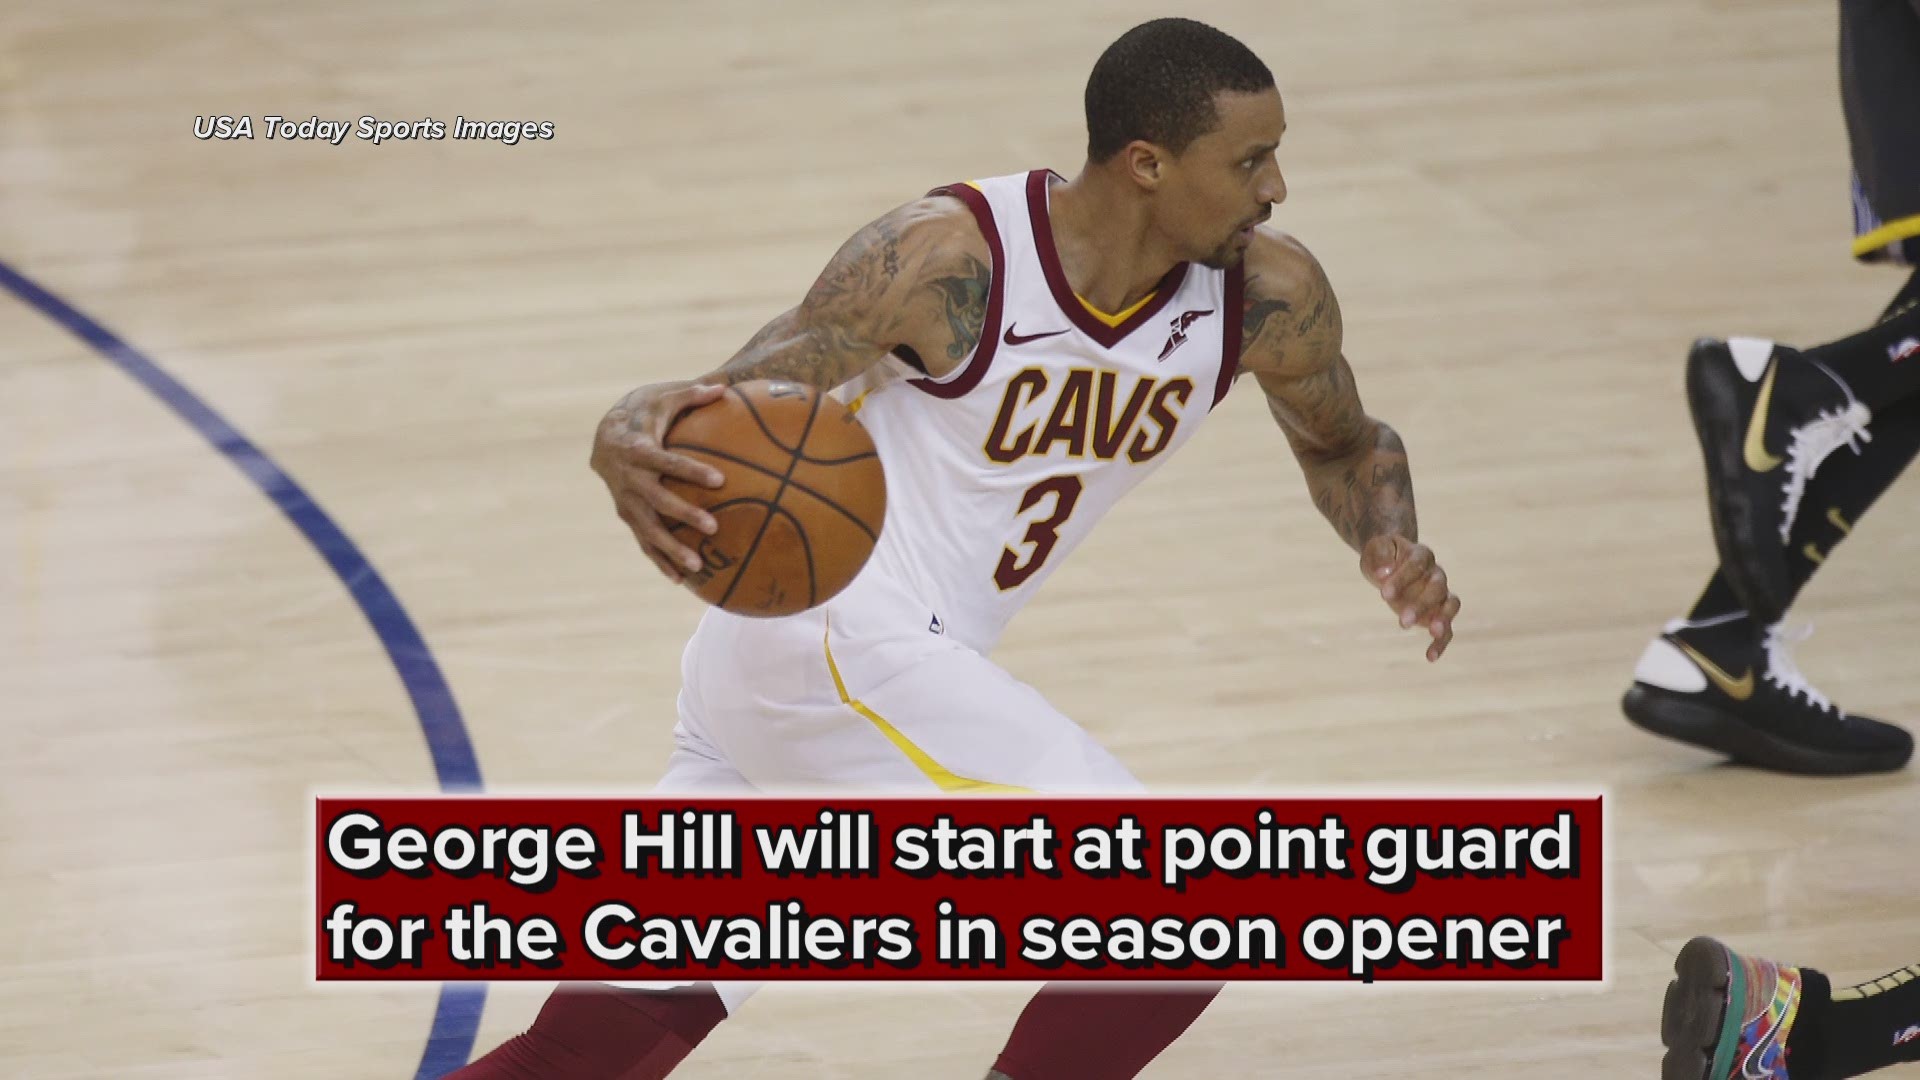 George Hill will start at point guard for the Cleveland Cavaliers in season opener, per Tyronn Lue